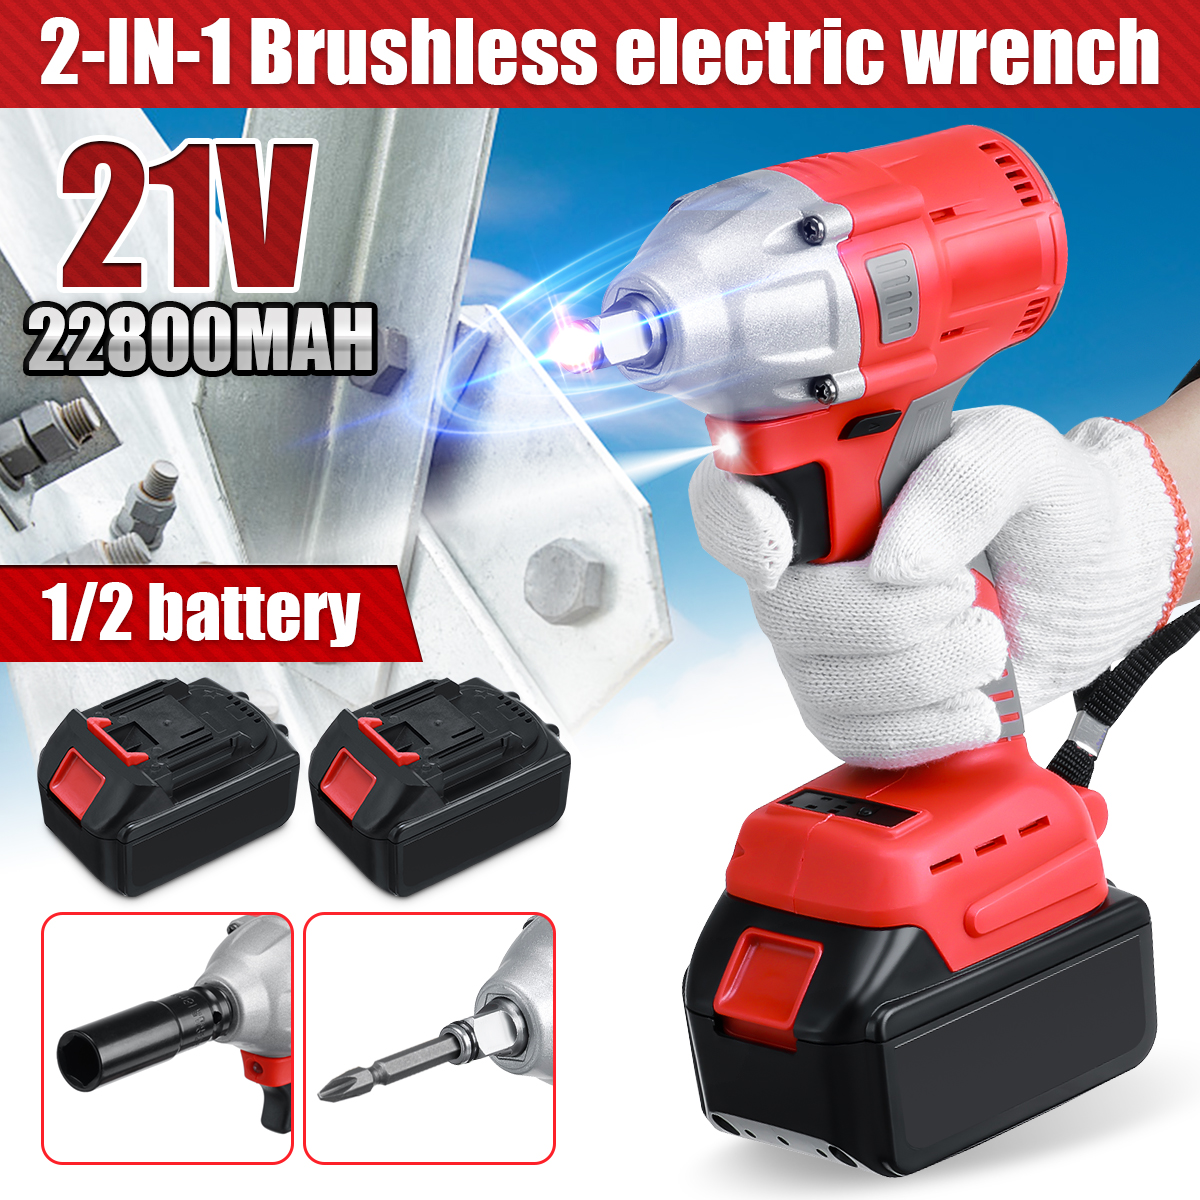 21V-Brushless-Wlectric-Torque-Wrench-Cordless-2-In-1-Screwdriver-Wrench-Adapted-To-Makita-Battery-1843518-1